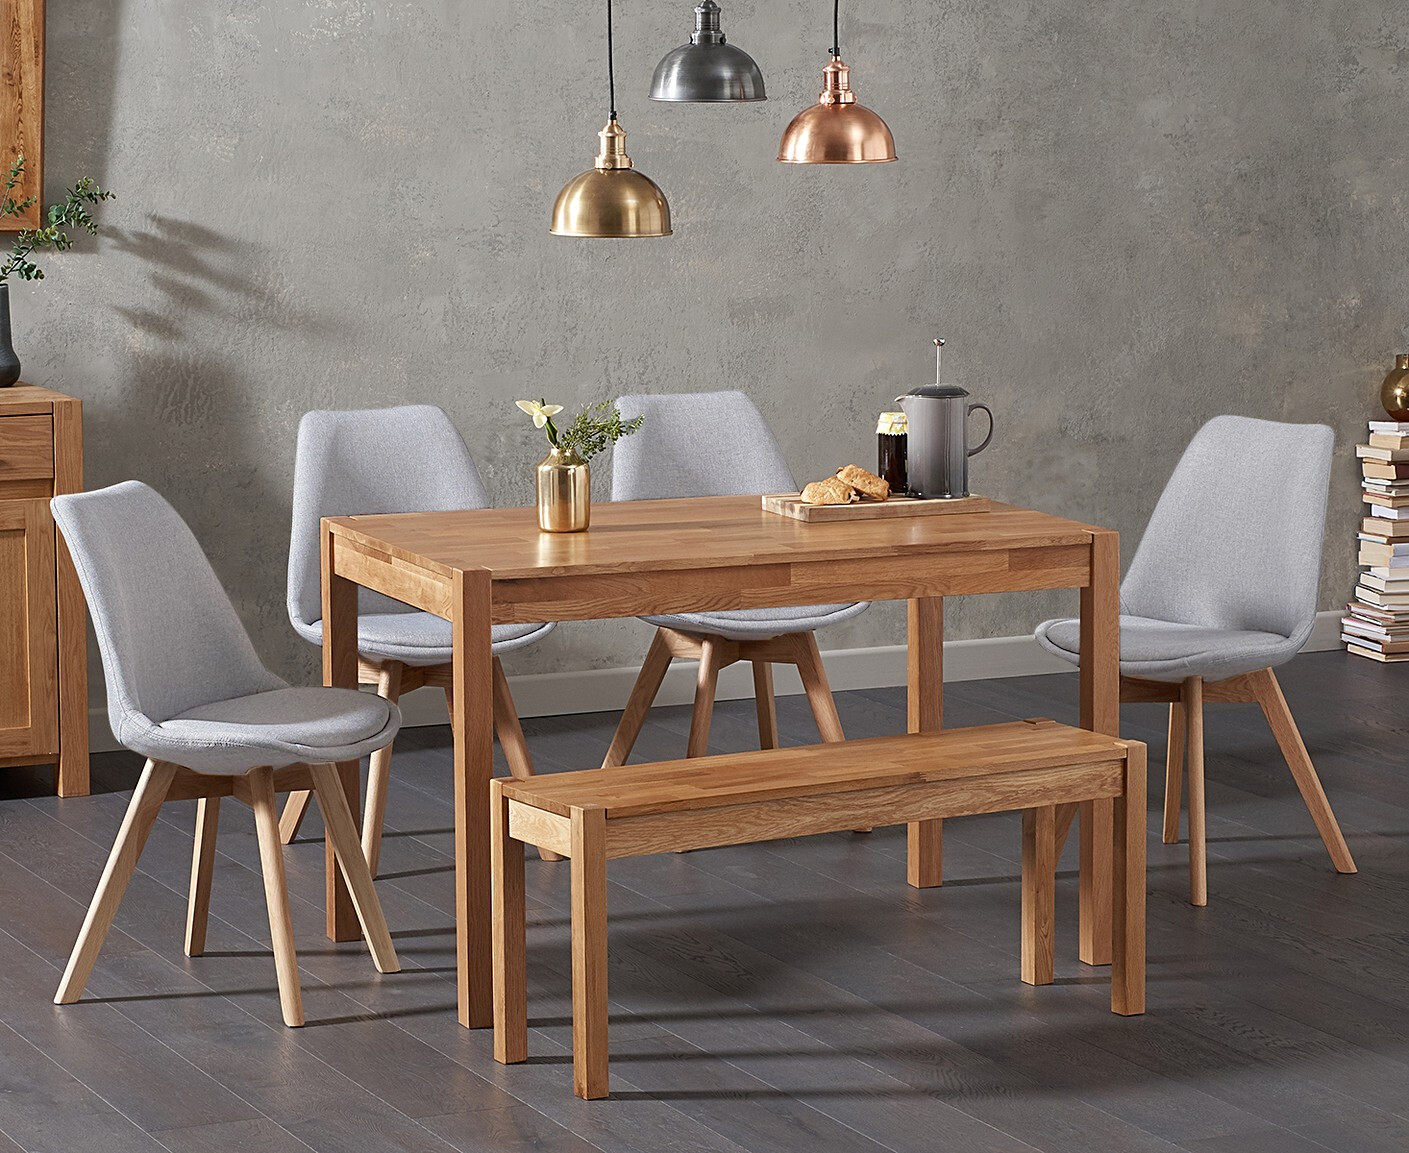 York 120cm Solid Oak Dining Table With 2 Light Grey Orson Fabric Chairs And 1 Bench